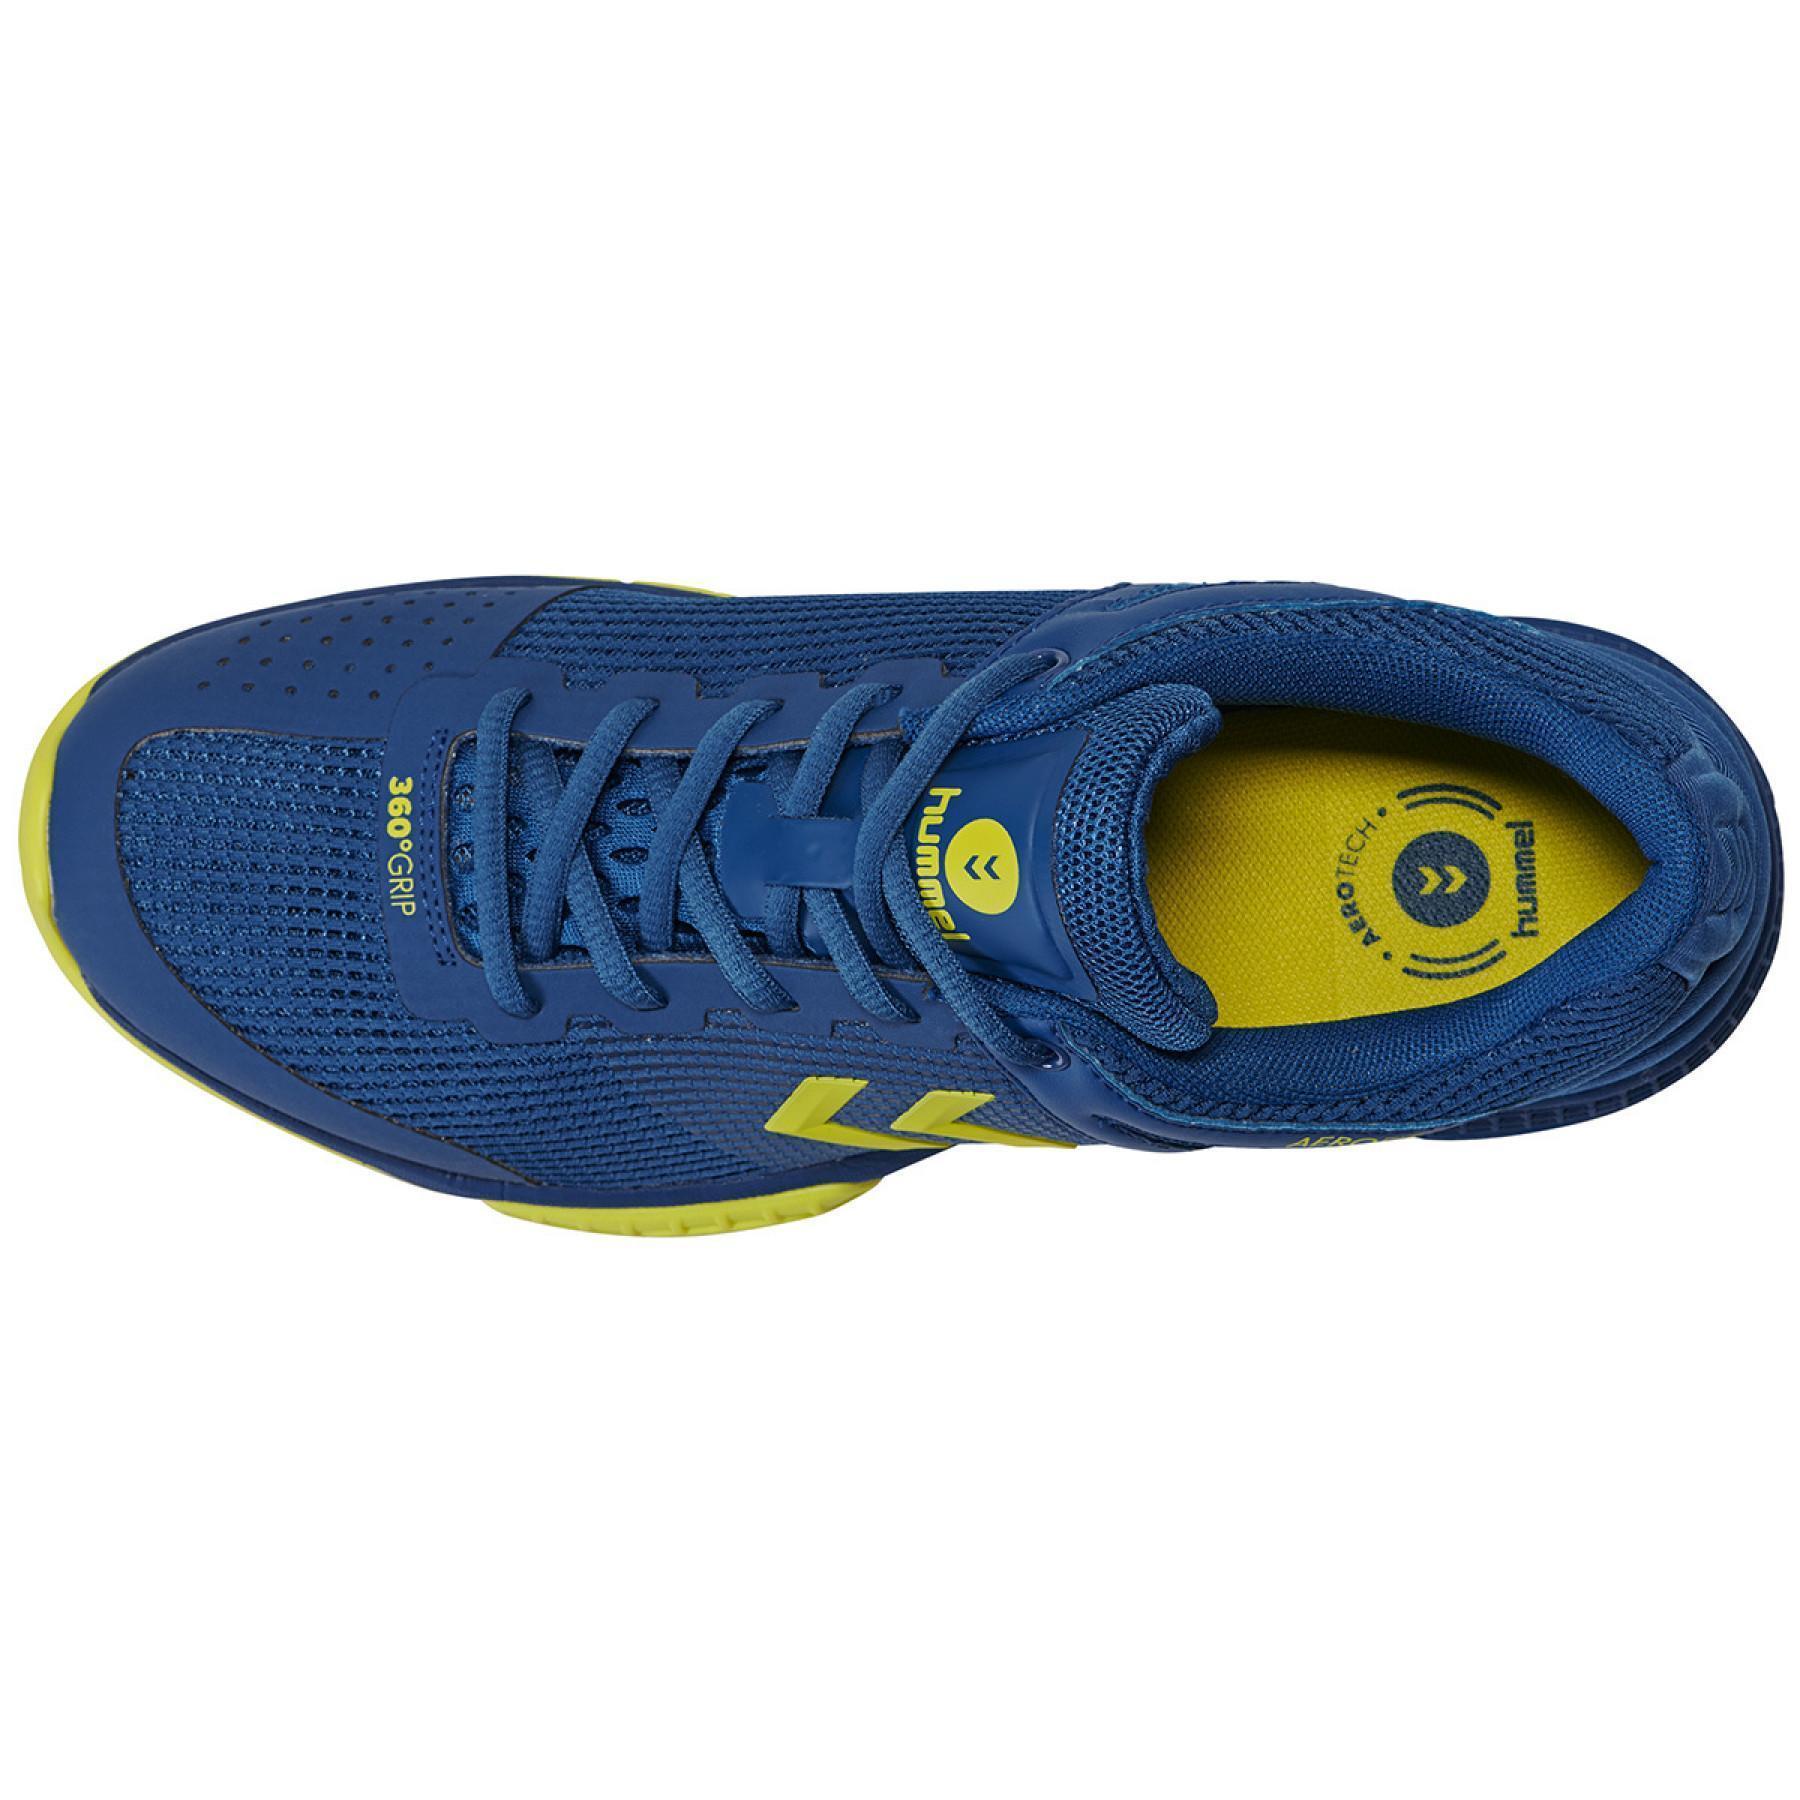 Chaussures Hummel aerocharge hb180 rely 3.0